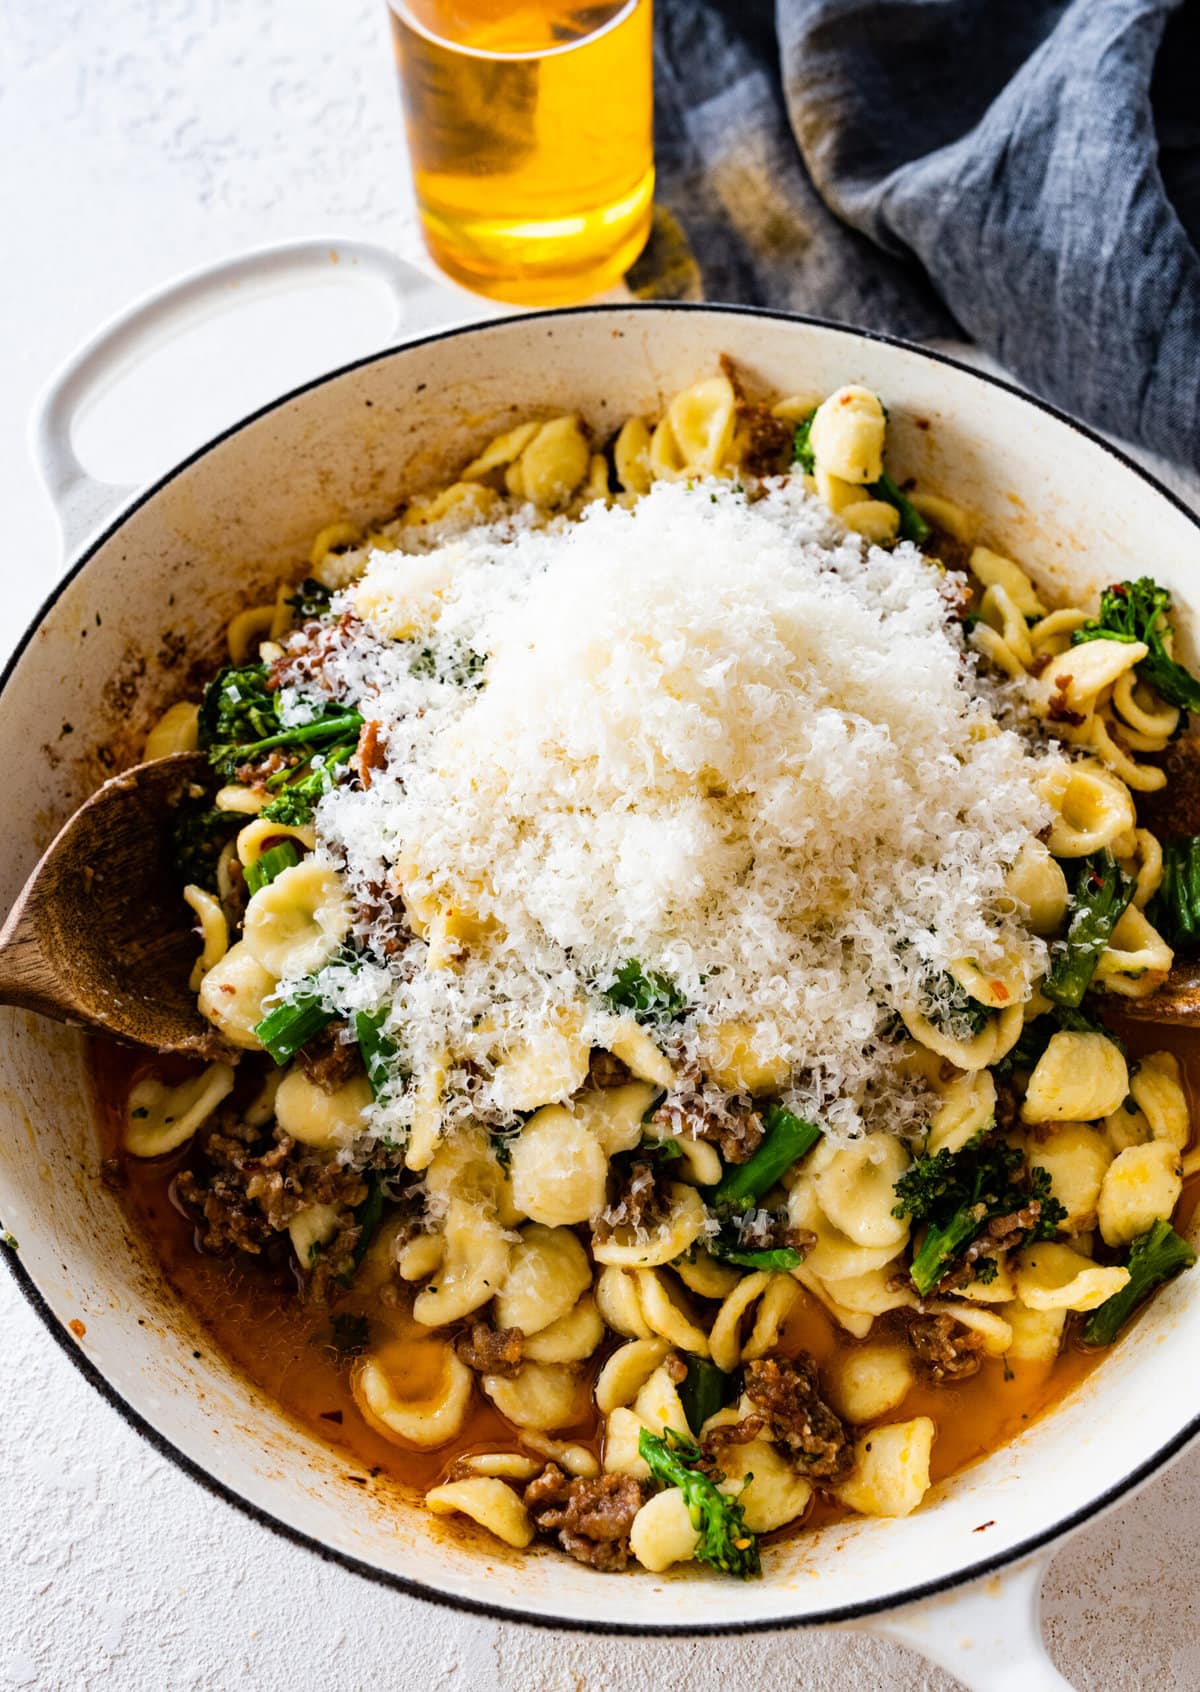 how to make Easy Orecchiette with Sausage and Broccoli- step-by-step: add parmigiano cheese to the cooked broccoli to the sausage.